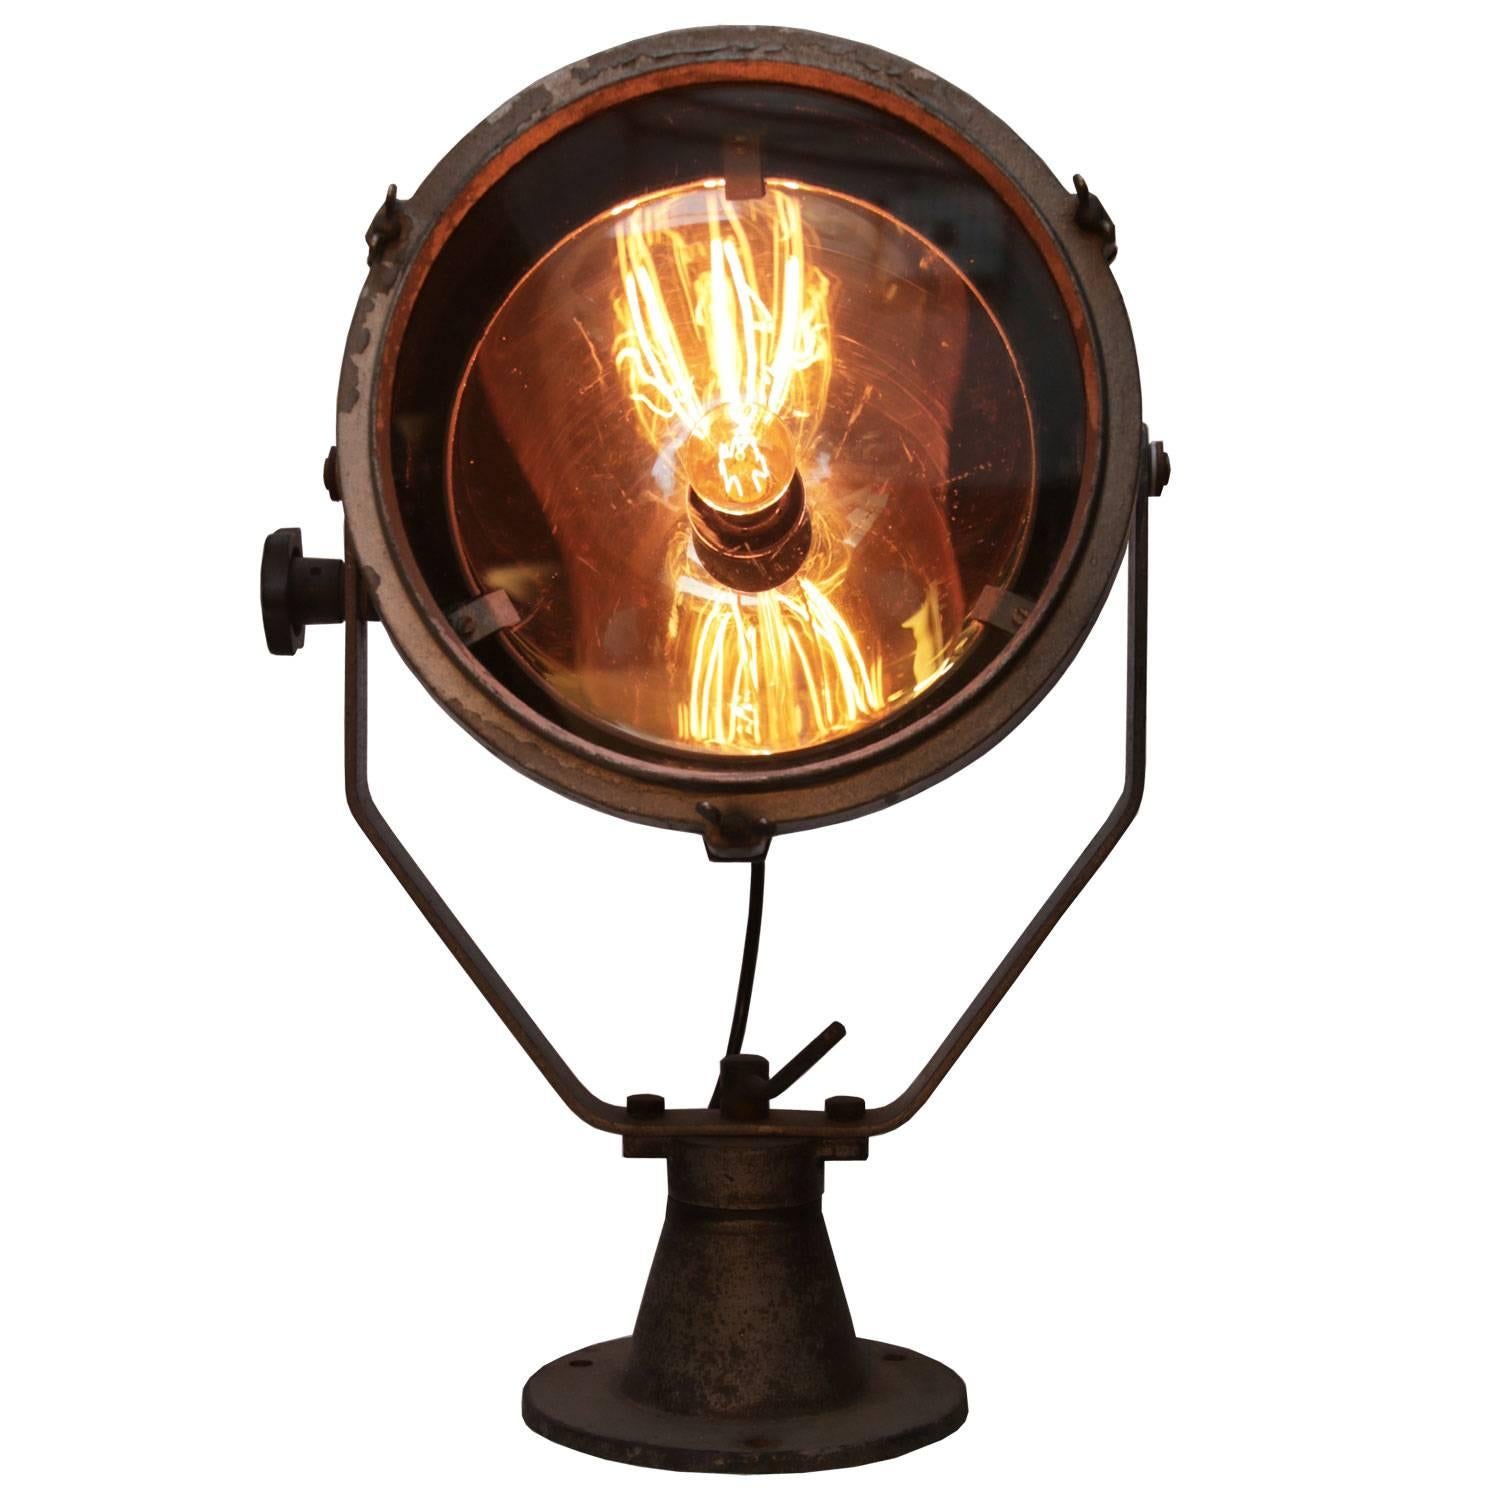 Cast iron with clear glass. Floor or wall light.

Weight: 11.0 kg / 24.3 lb

All lamps have been made suitable by international standards for incandescent light bulbs, energy-efficient and LED bulbs. E26/E27 bulb holders and new wiring are CE